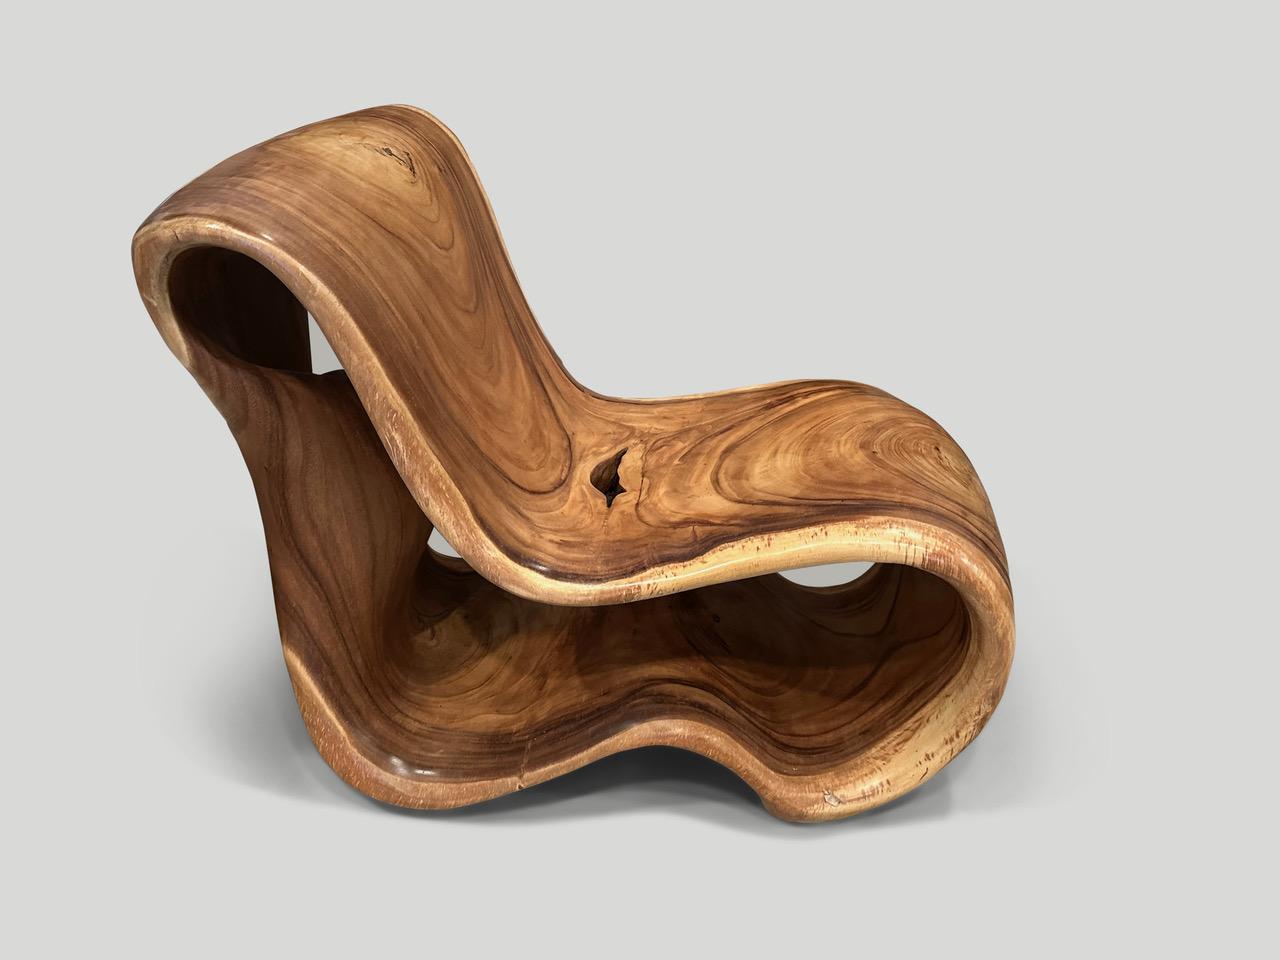 Andrianna Shamaris Impressive Soar Wood Sculptural Chair  In Excellent Condition For Sale In New York, NY